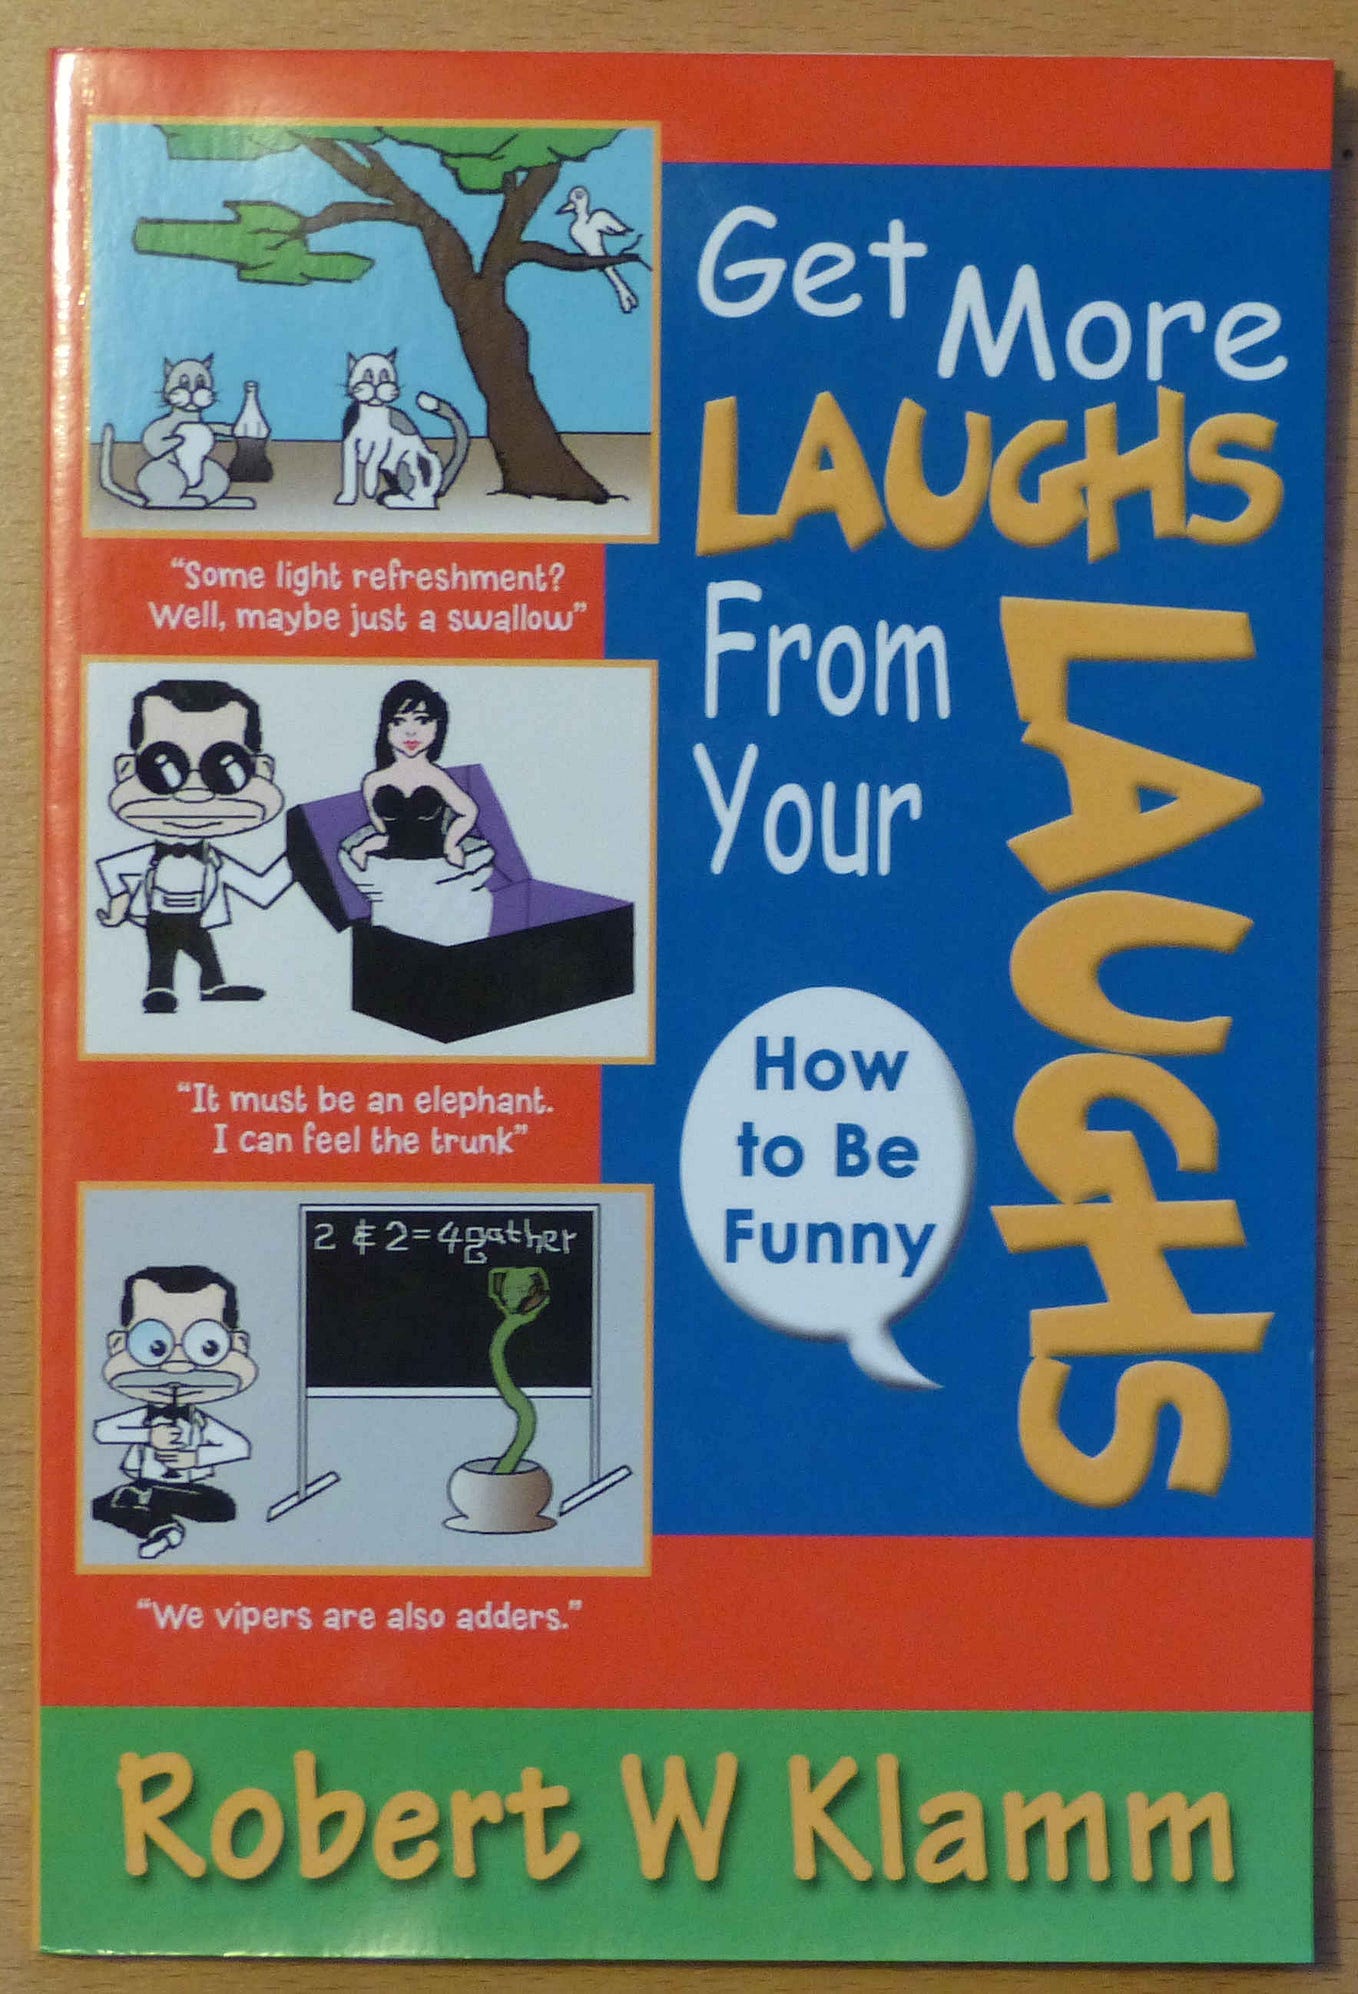 Get More Laughs From Your Laughs, by Robert W Klamm